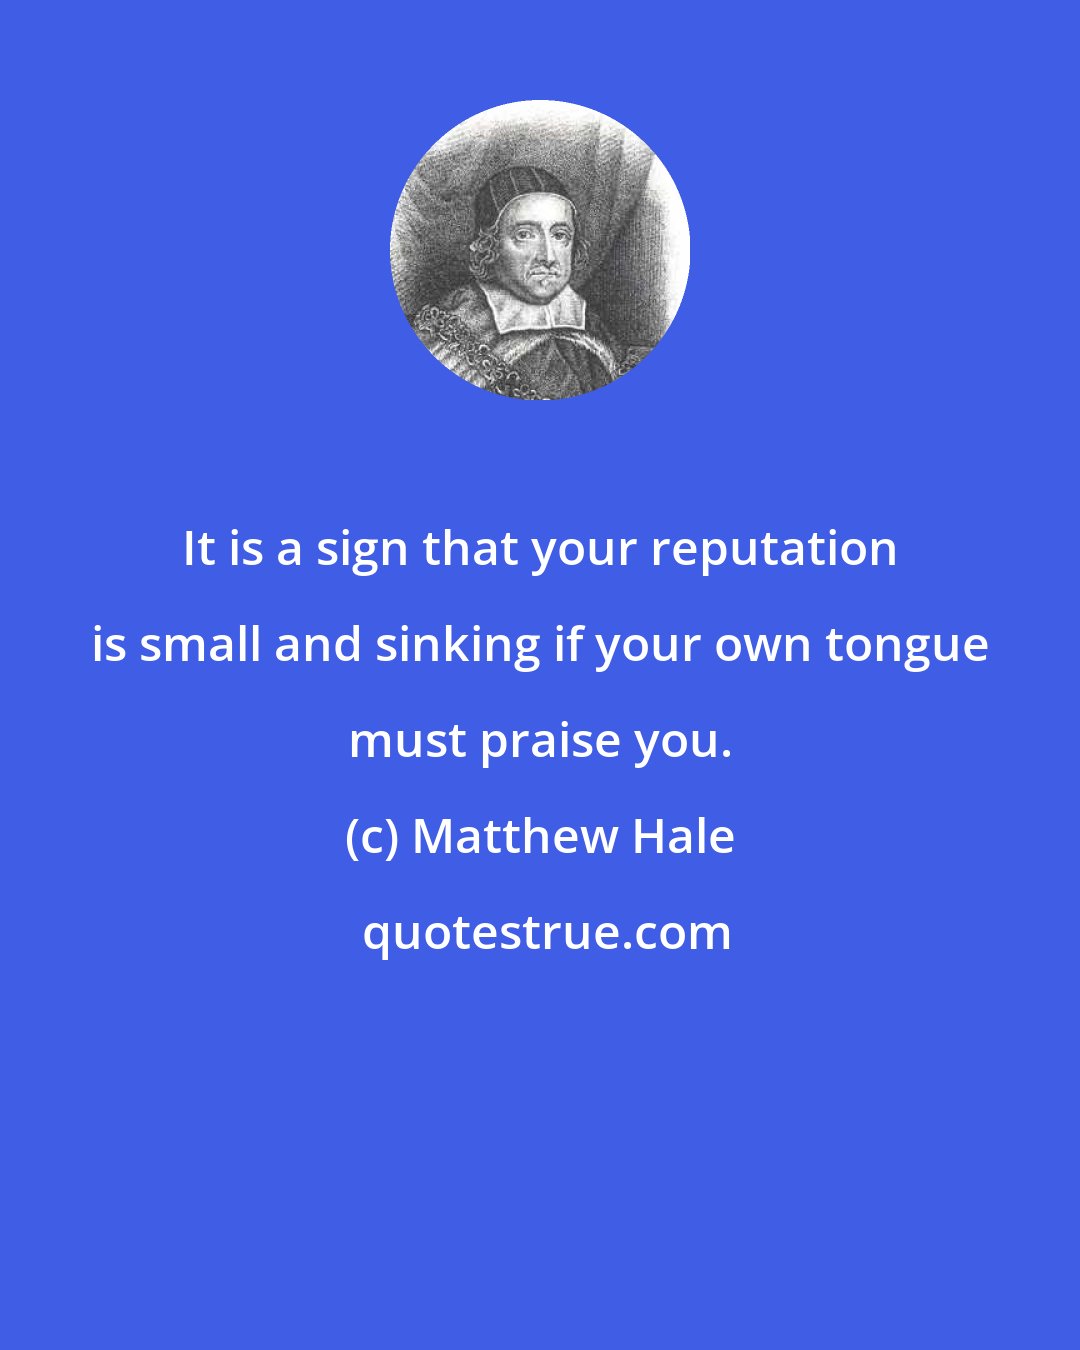 Matthew Hale: It is a sign that your reputation is small and sinking if your own tongue must praise you.